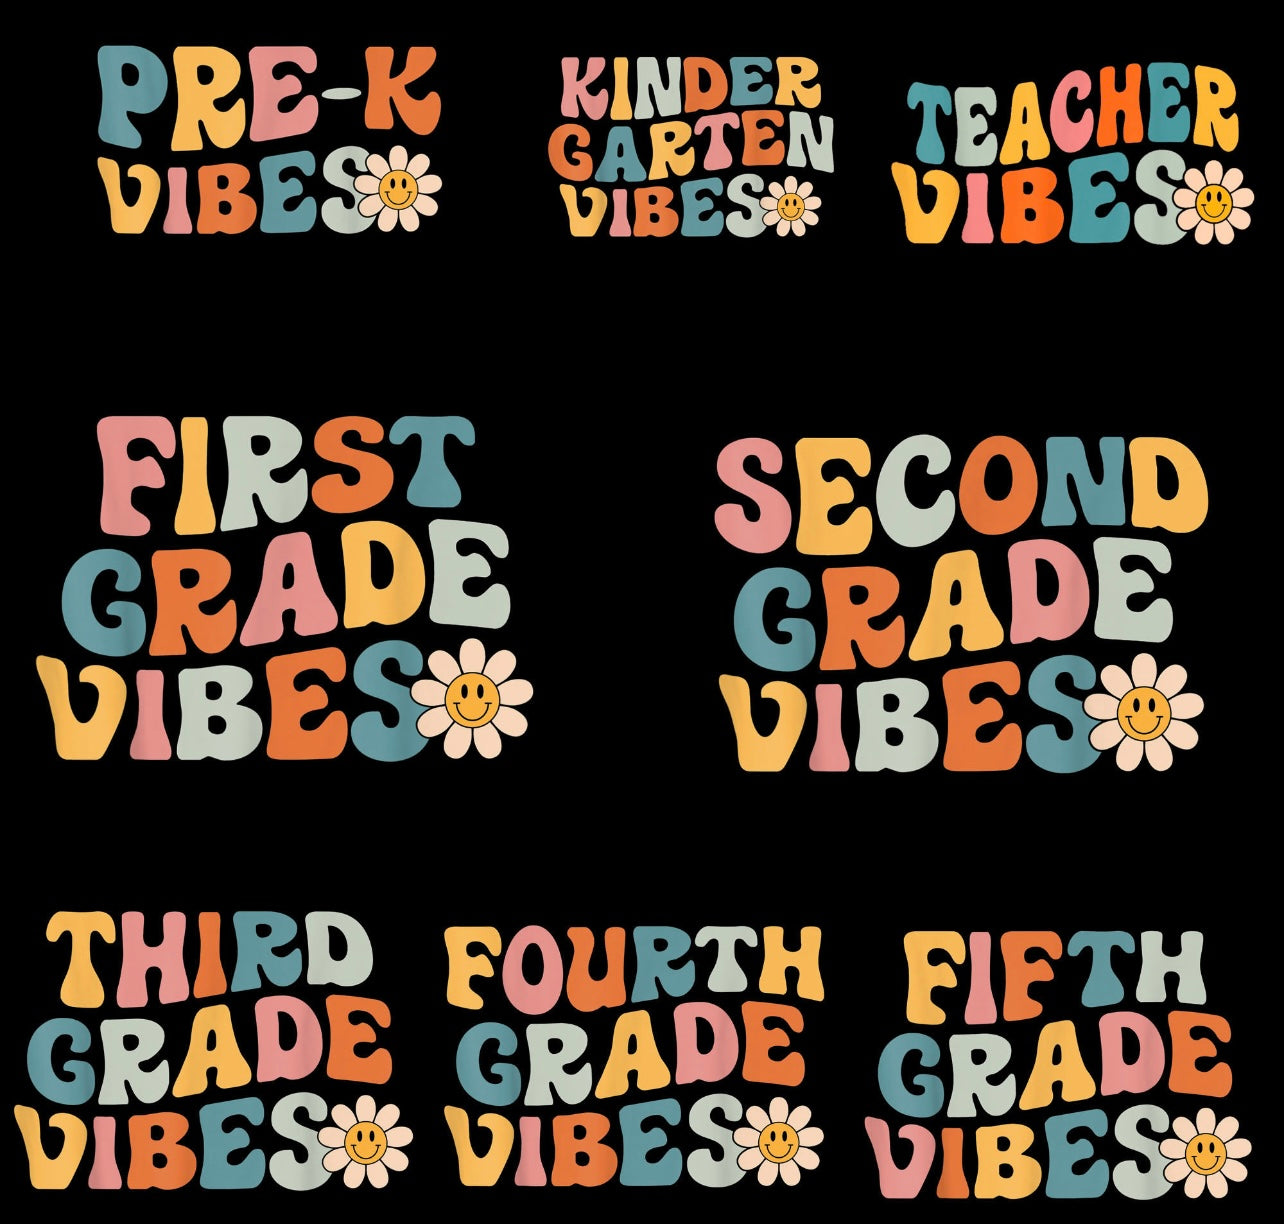 Vibes (2nd-5th)